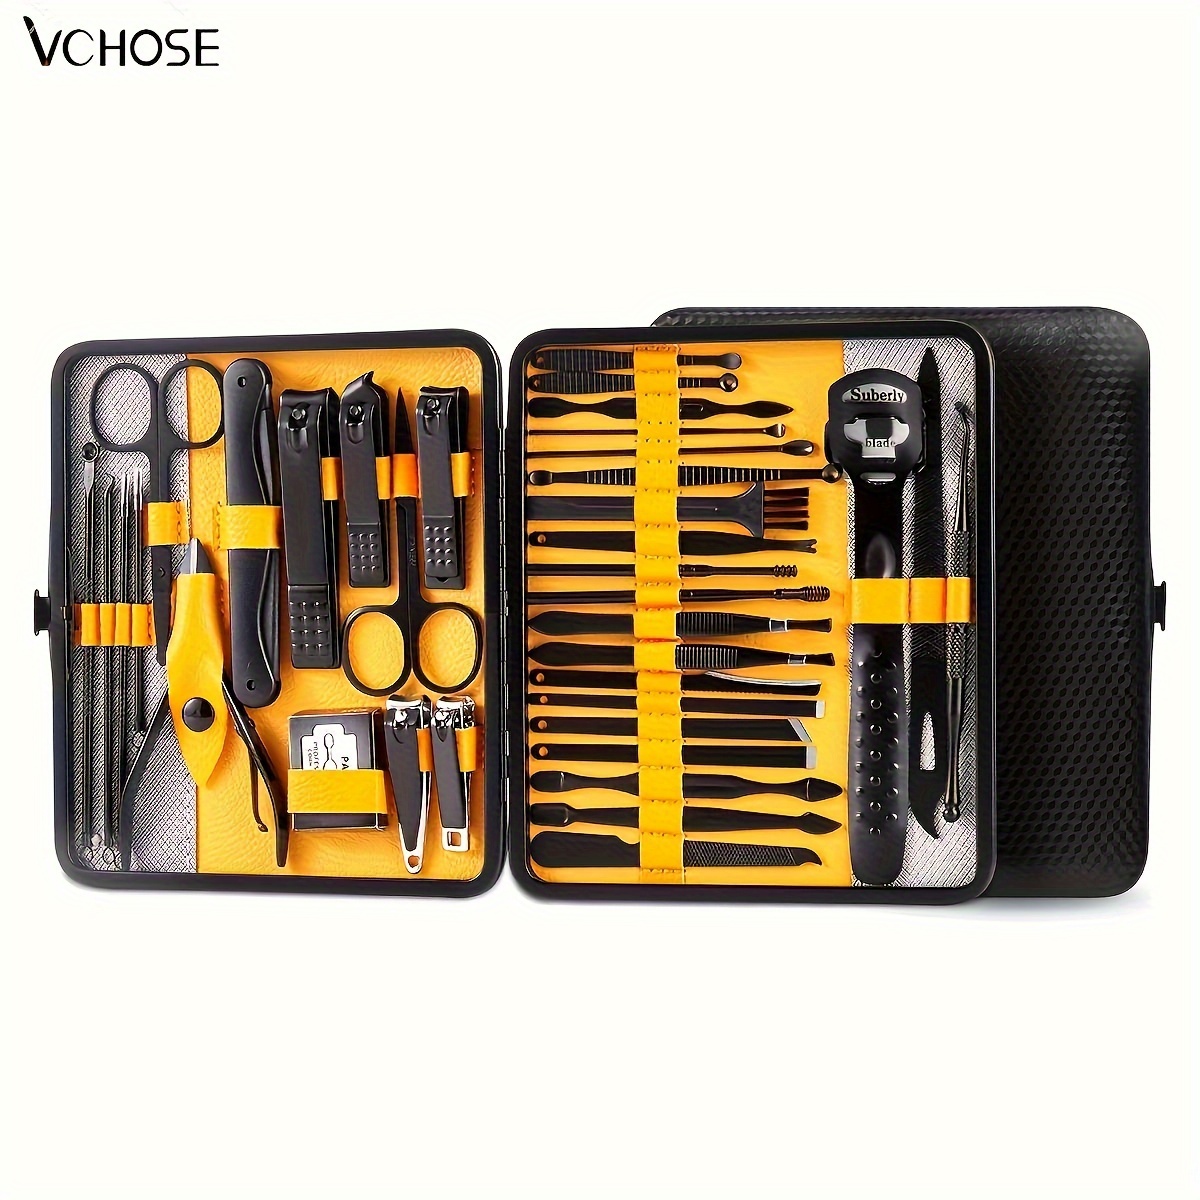 

36pcs/set Nail Clippers Manicure Tool Set, With Portable Travel Case, Cuticle Nippers And Cutter Kit, Professional Nail Clippers Pedicure Kit, Grooming Kit For Travel